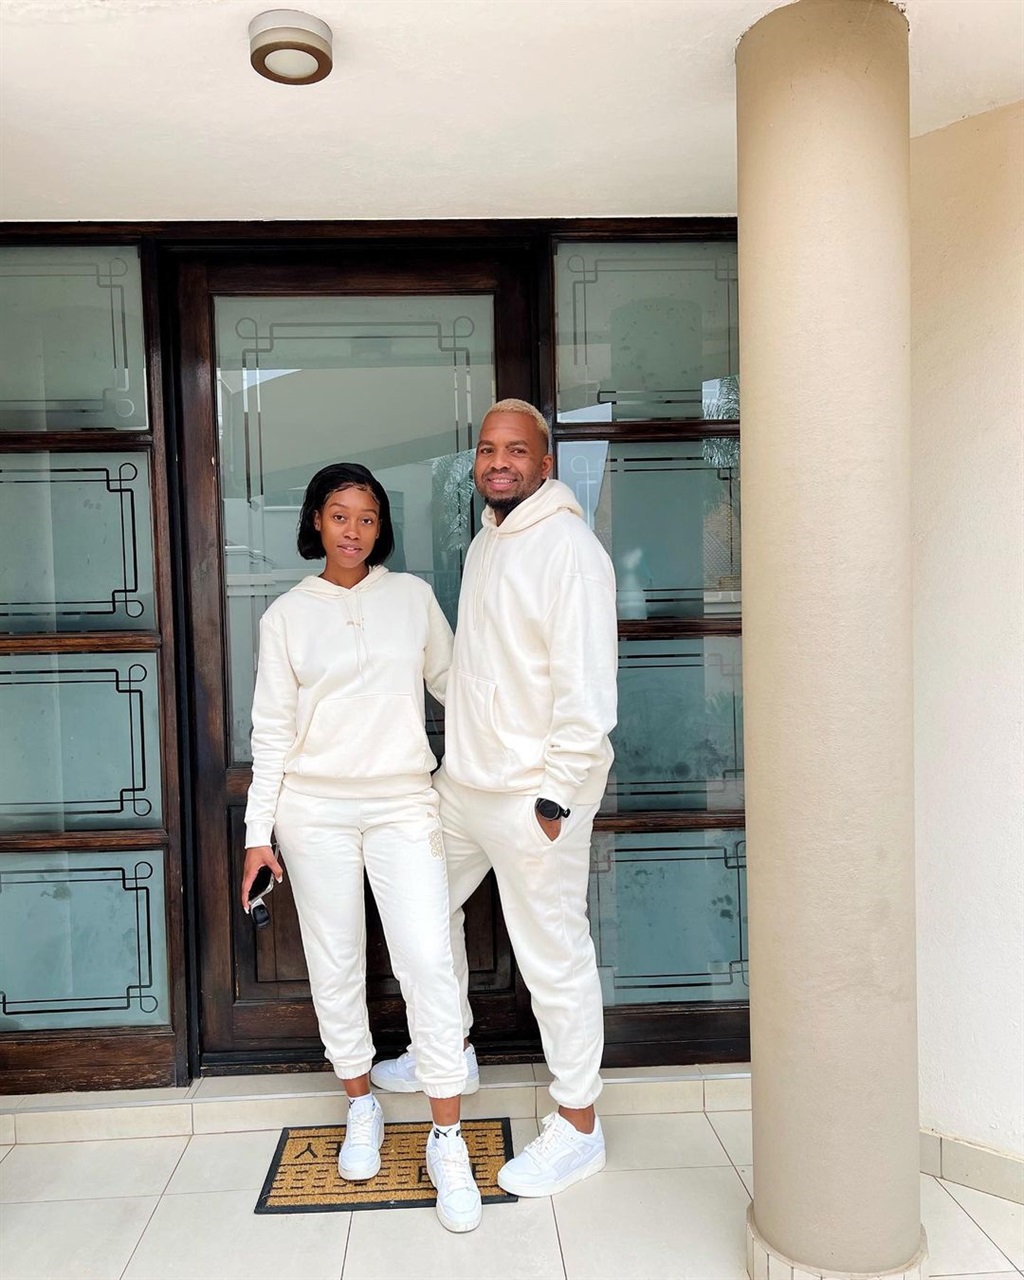 Itumeleng Khune matching outfits with his wife Sphelele.